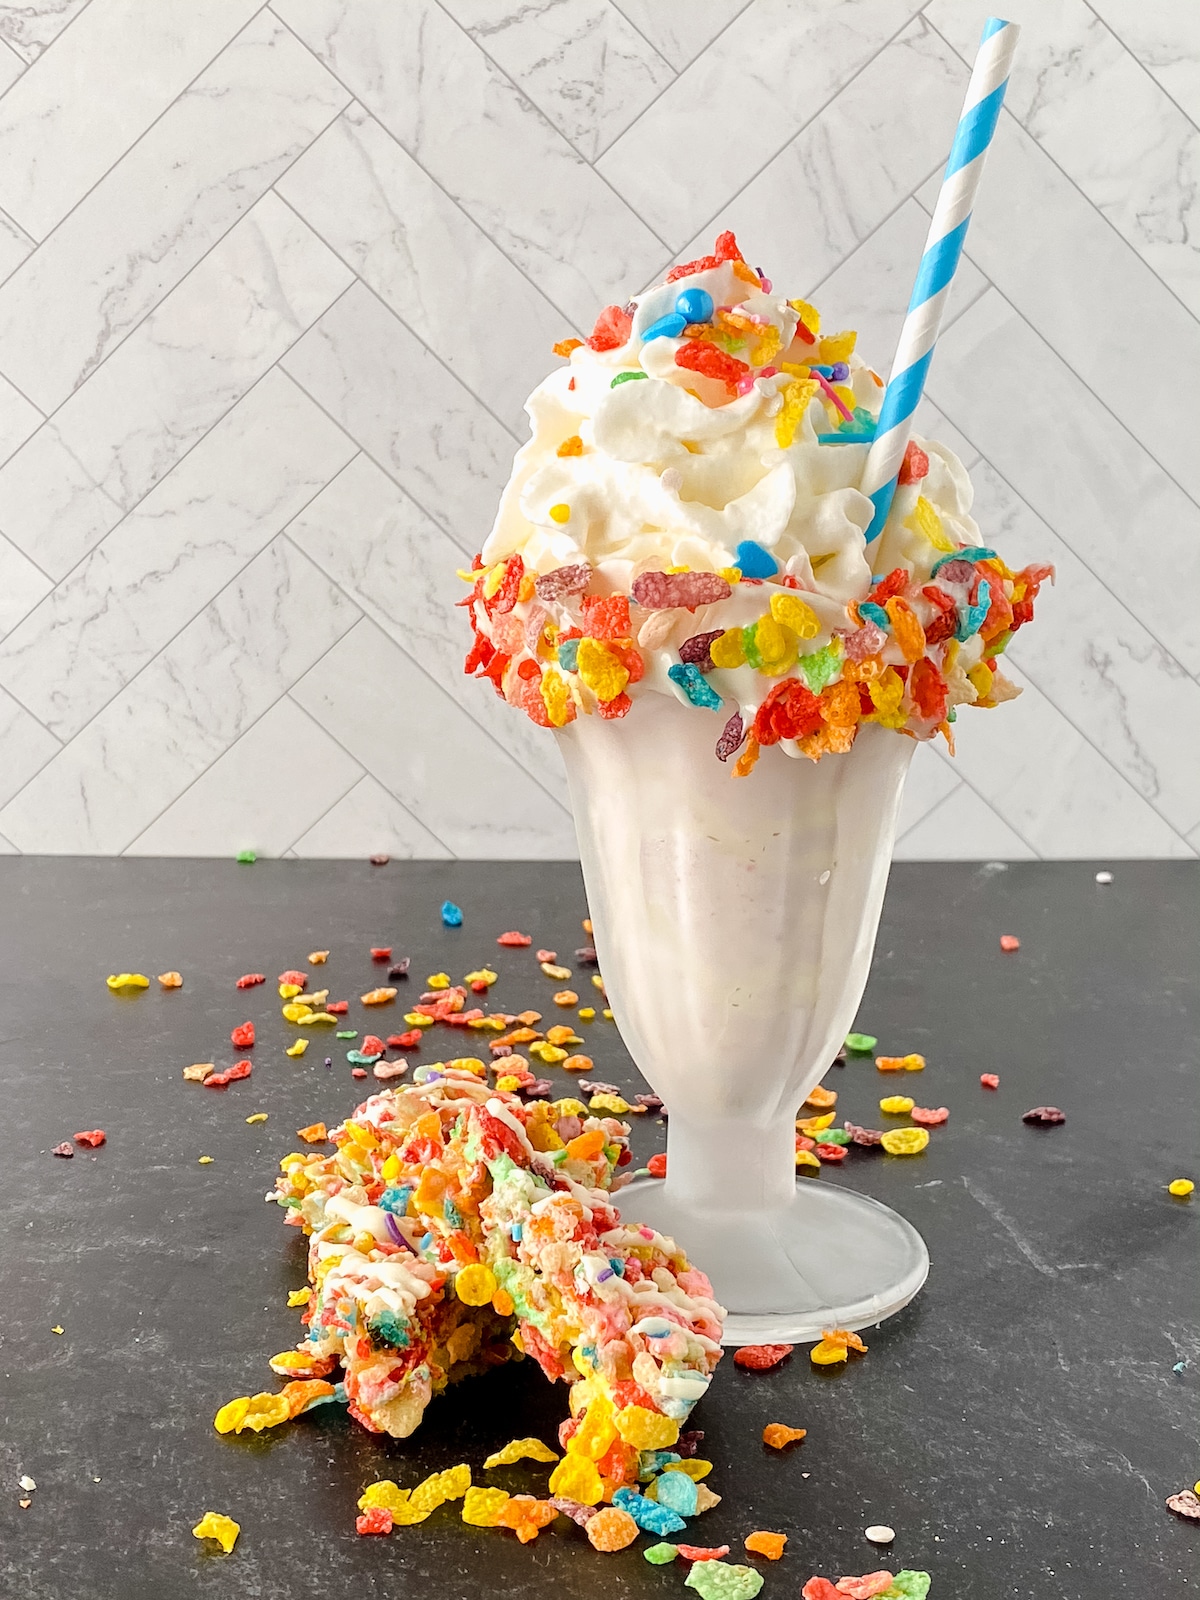 Tall soda glass filled with white milkshake on black table with colorful cereal on top of glass